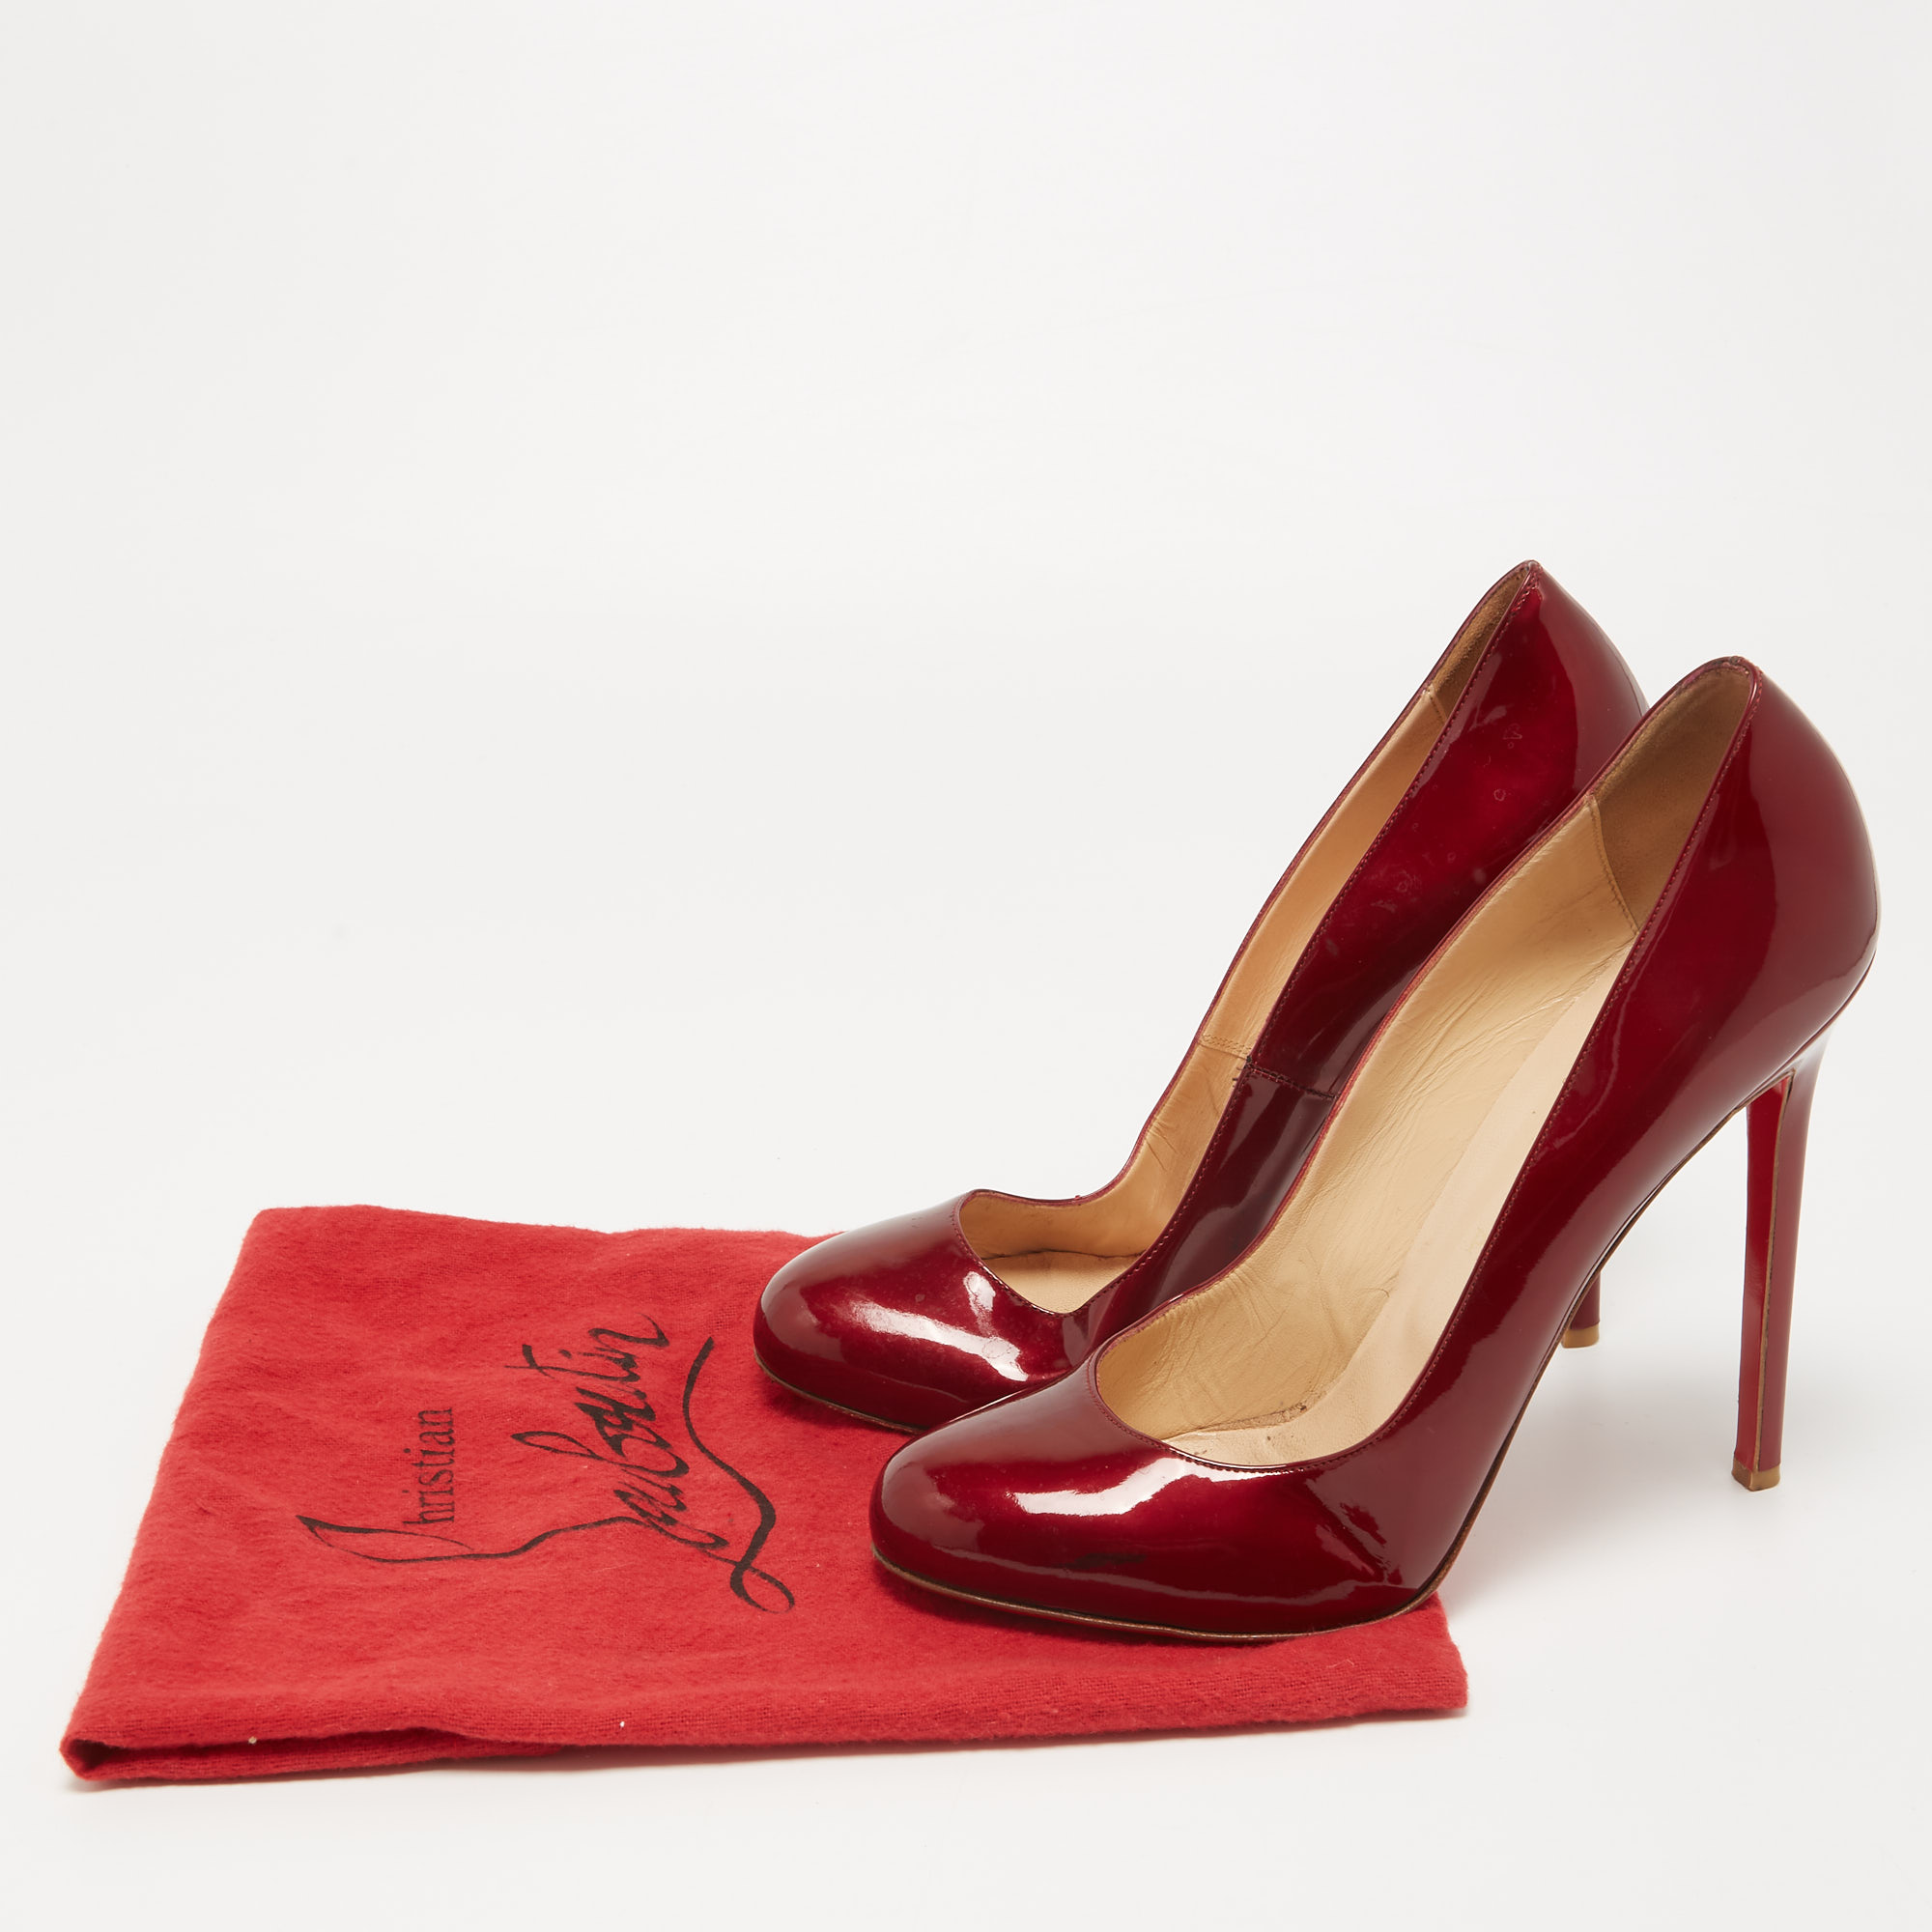 Christian Louboutin Metallic Red Patent Simple Pumps Size 40